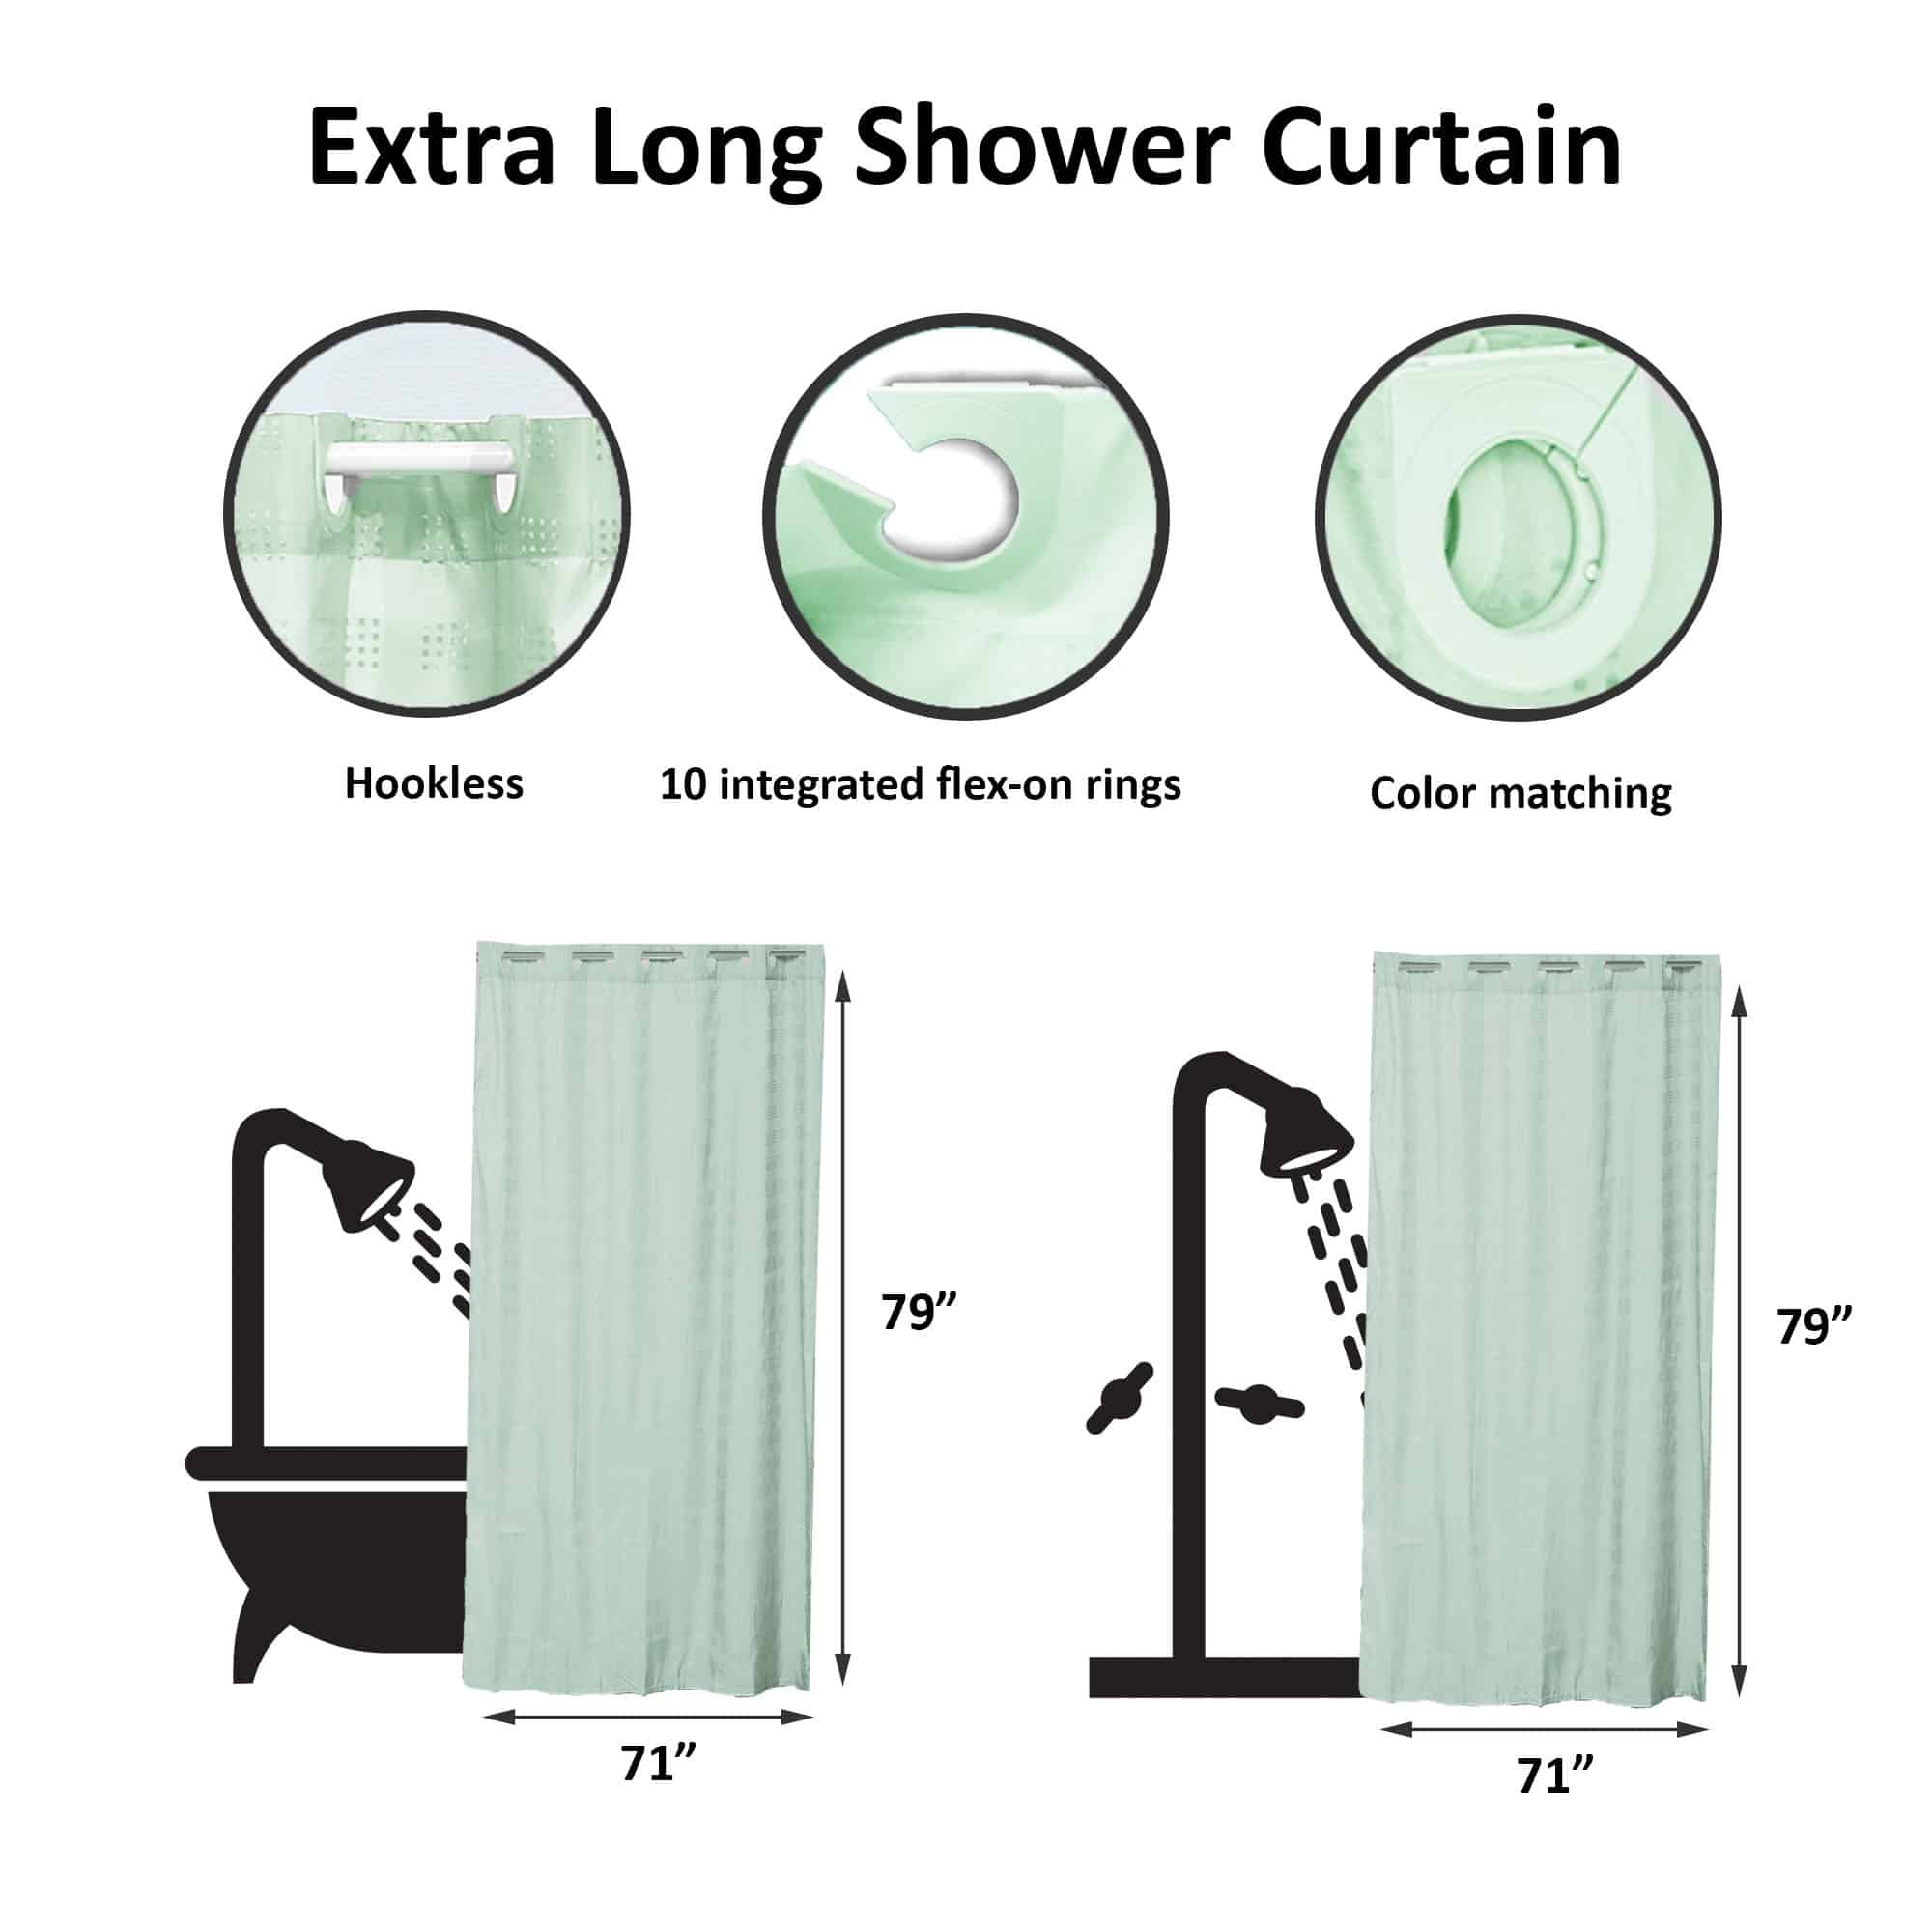 https://evideco.com/wp-content/uploads/2021/02/1207146-Almond-Green-Extra-Long-Shower-Curtain-Polyester-Hook-Less-Cubic-79-L-x-71-W-Almond-Green-3.jpg